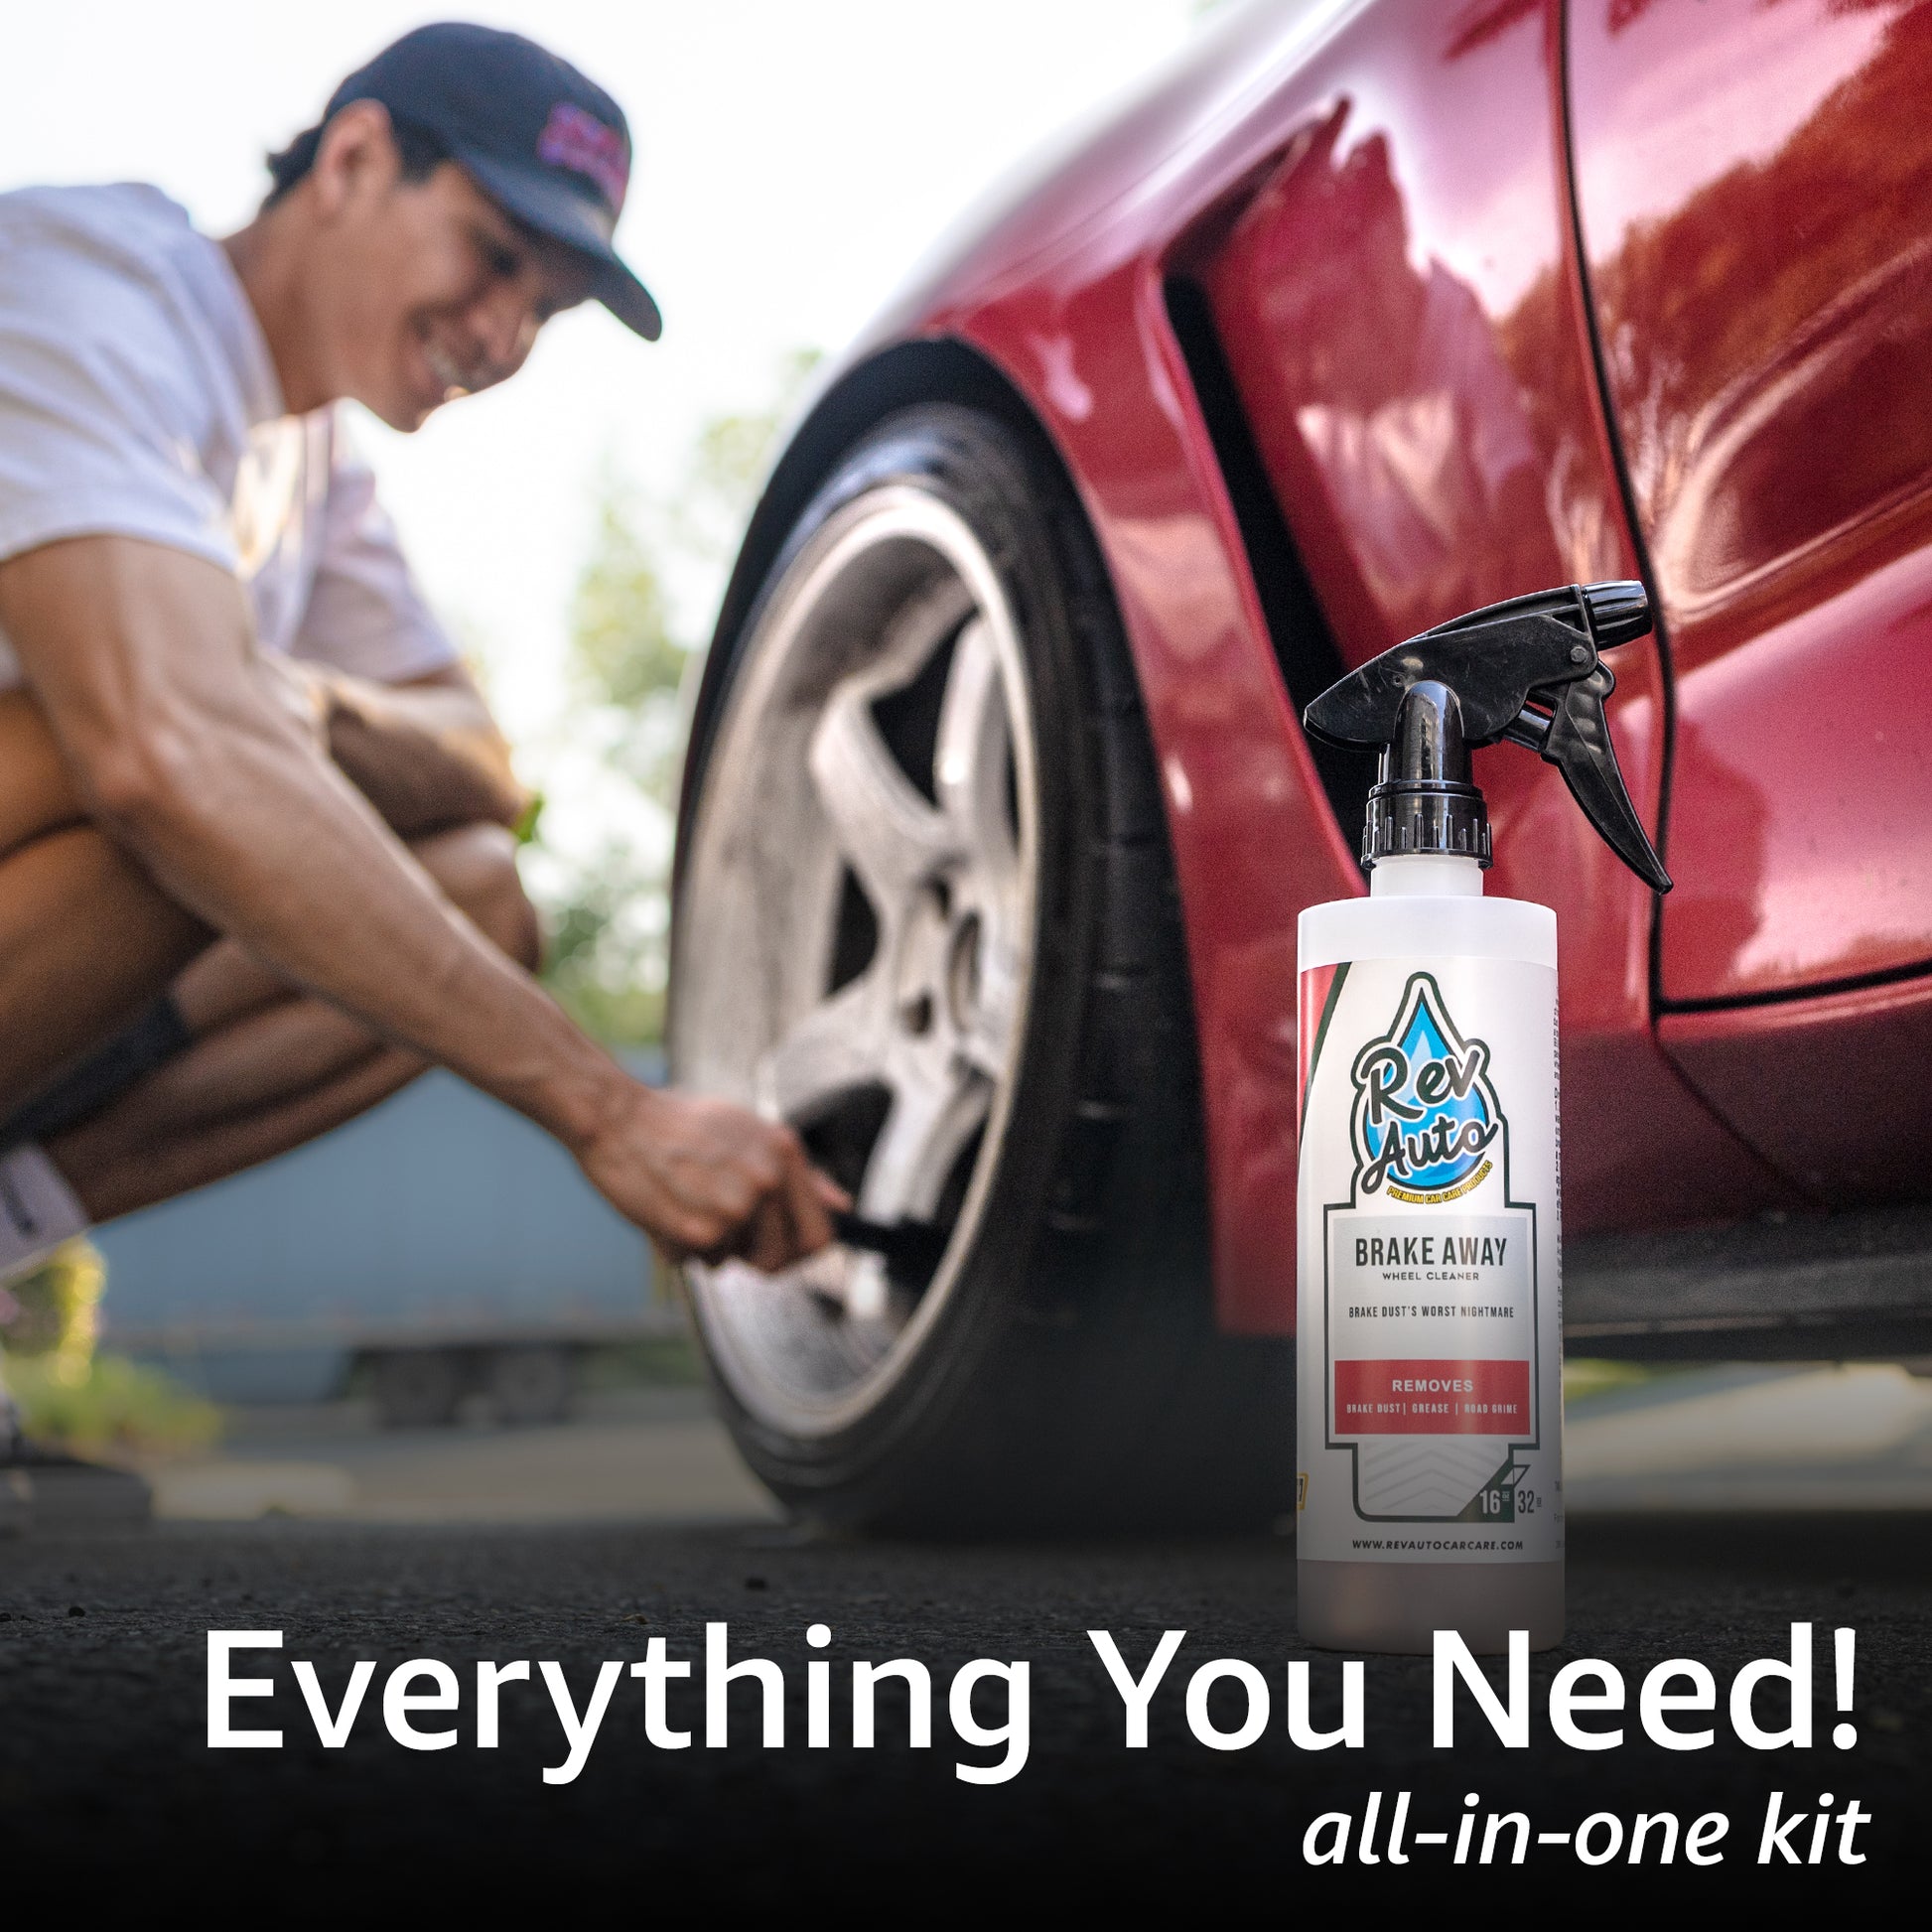 Rev Auto Wheel Cleaning Kit - 2 Item Wheel and Tire Cleaning Kit Includes 16oz Car Wheel Cleaner and Wheel Cleaner Brush Works for All Wheels and